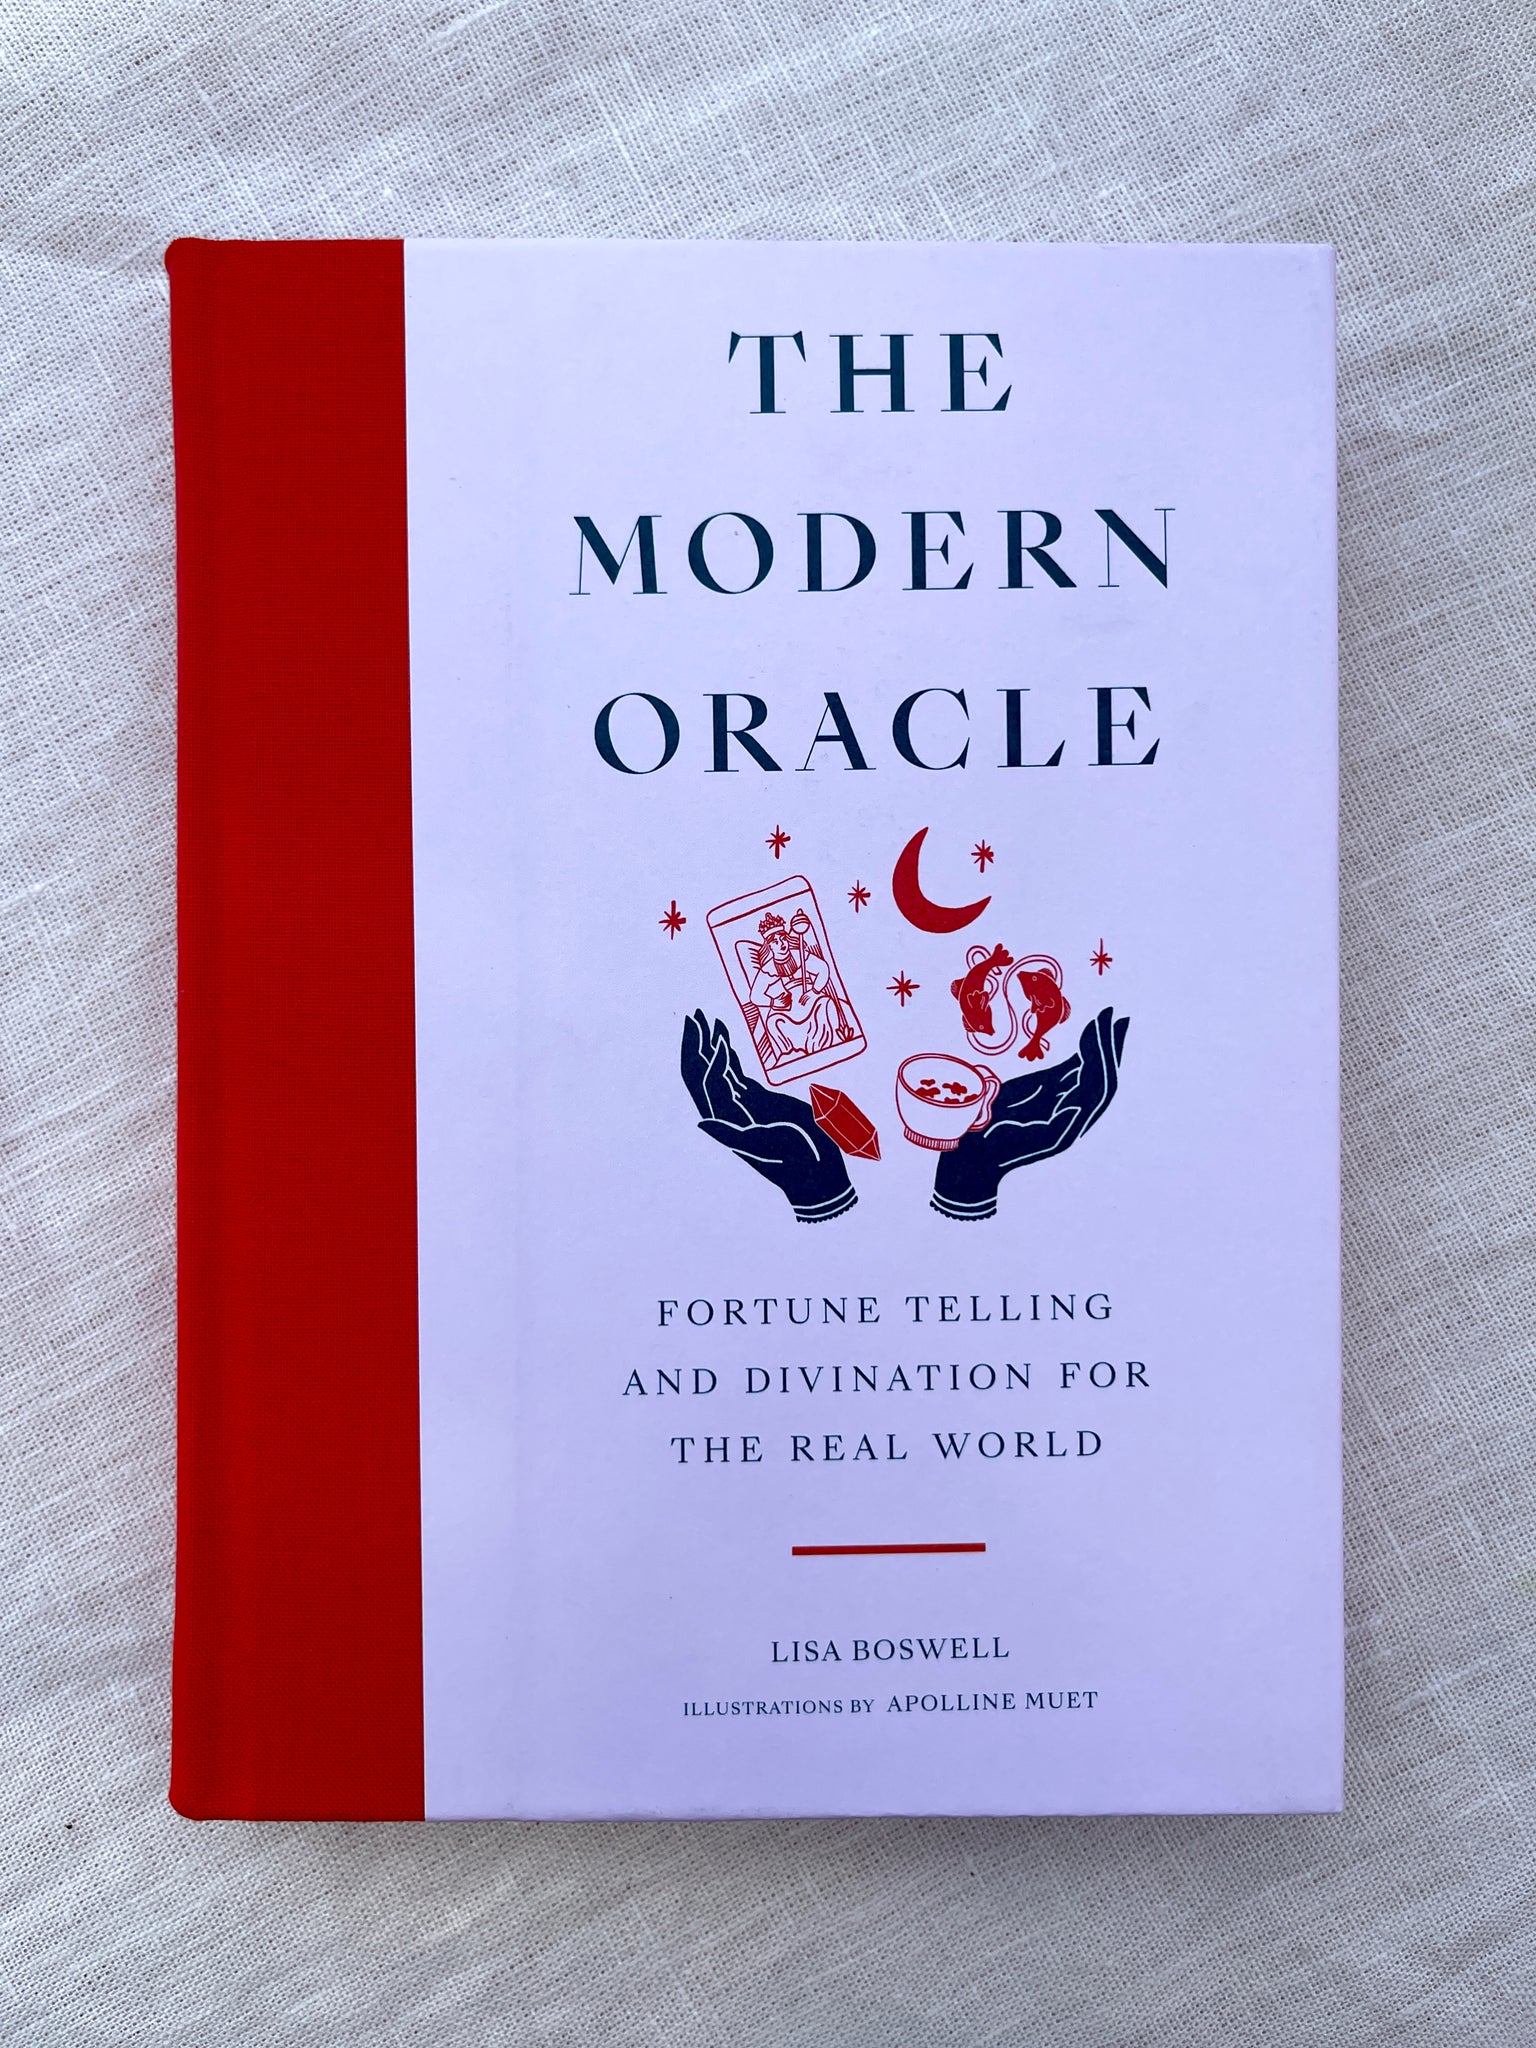 The Modern Oracle book fortune telling and divination for the real world by lisa boswell